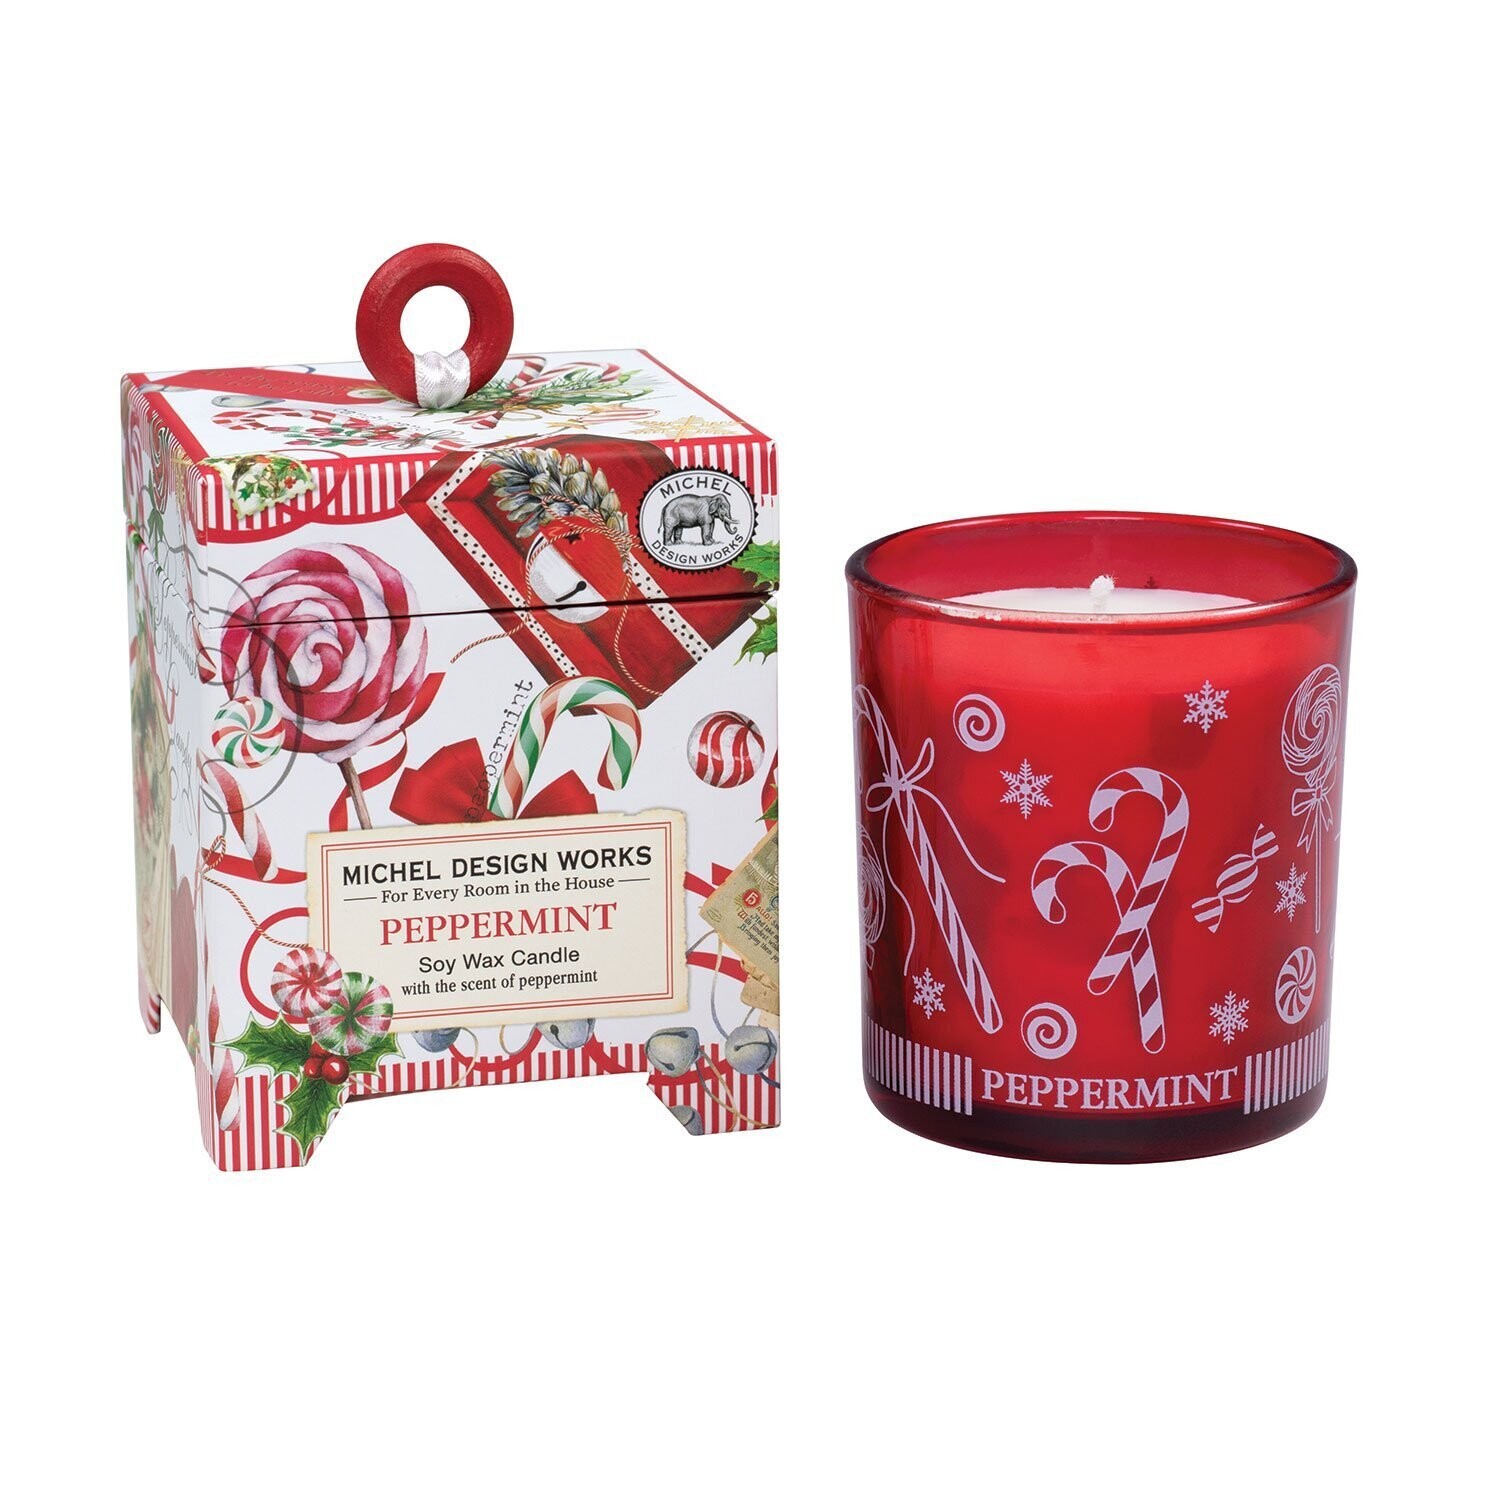 FINAL SALE - Peppermint - 6.5 Oz. Soy Wax Candle